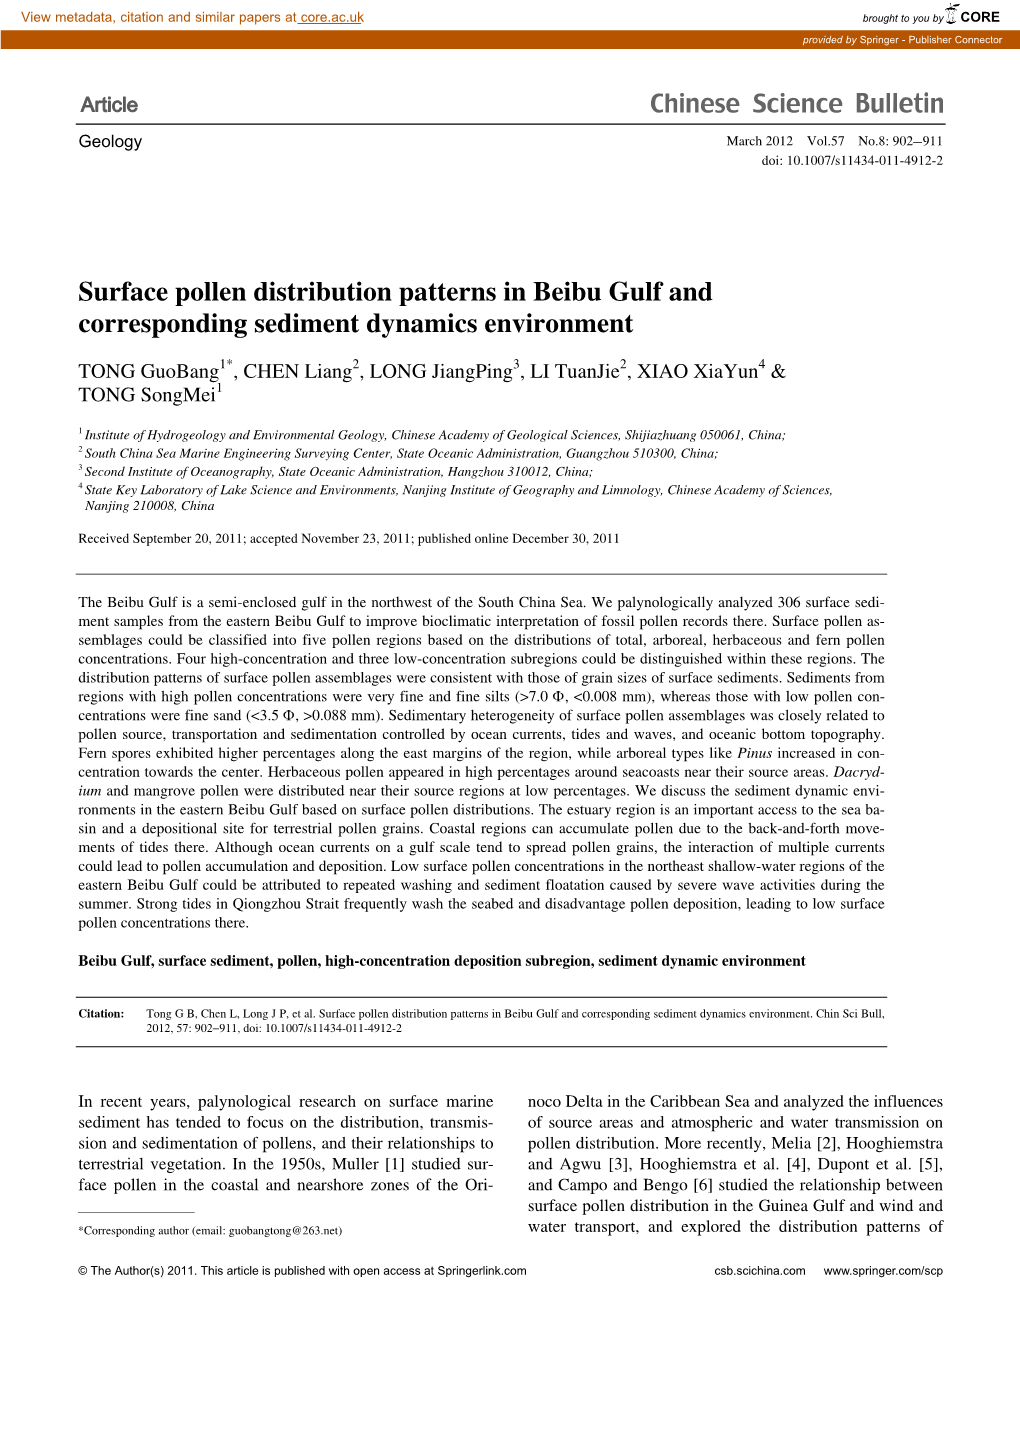 Surface Pollen Distribution Patterns in Beibu Gulf and Corresponding Sediment Dynamics Environment